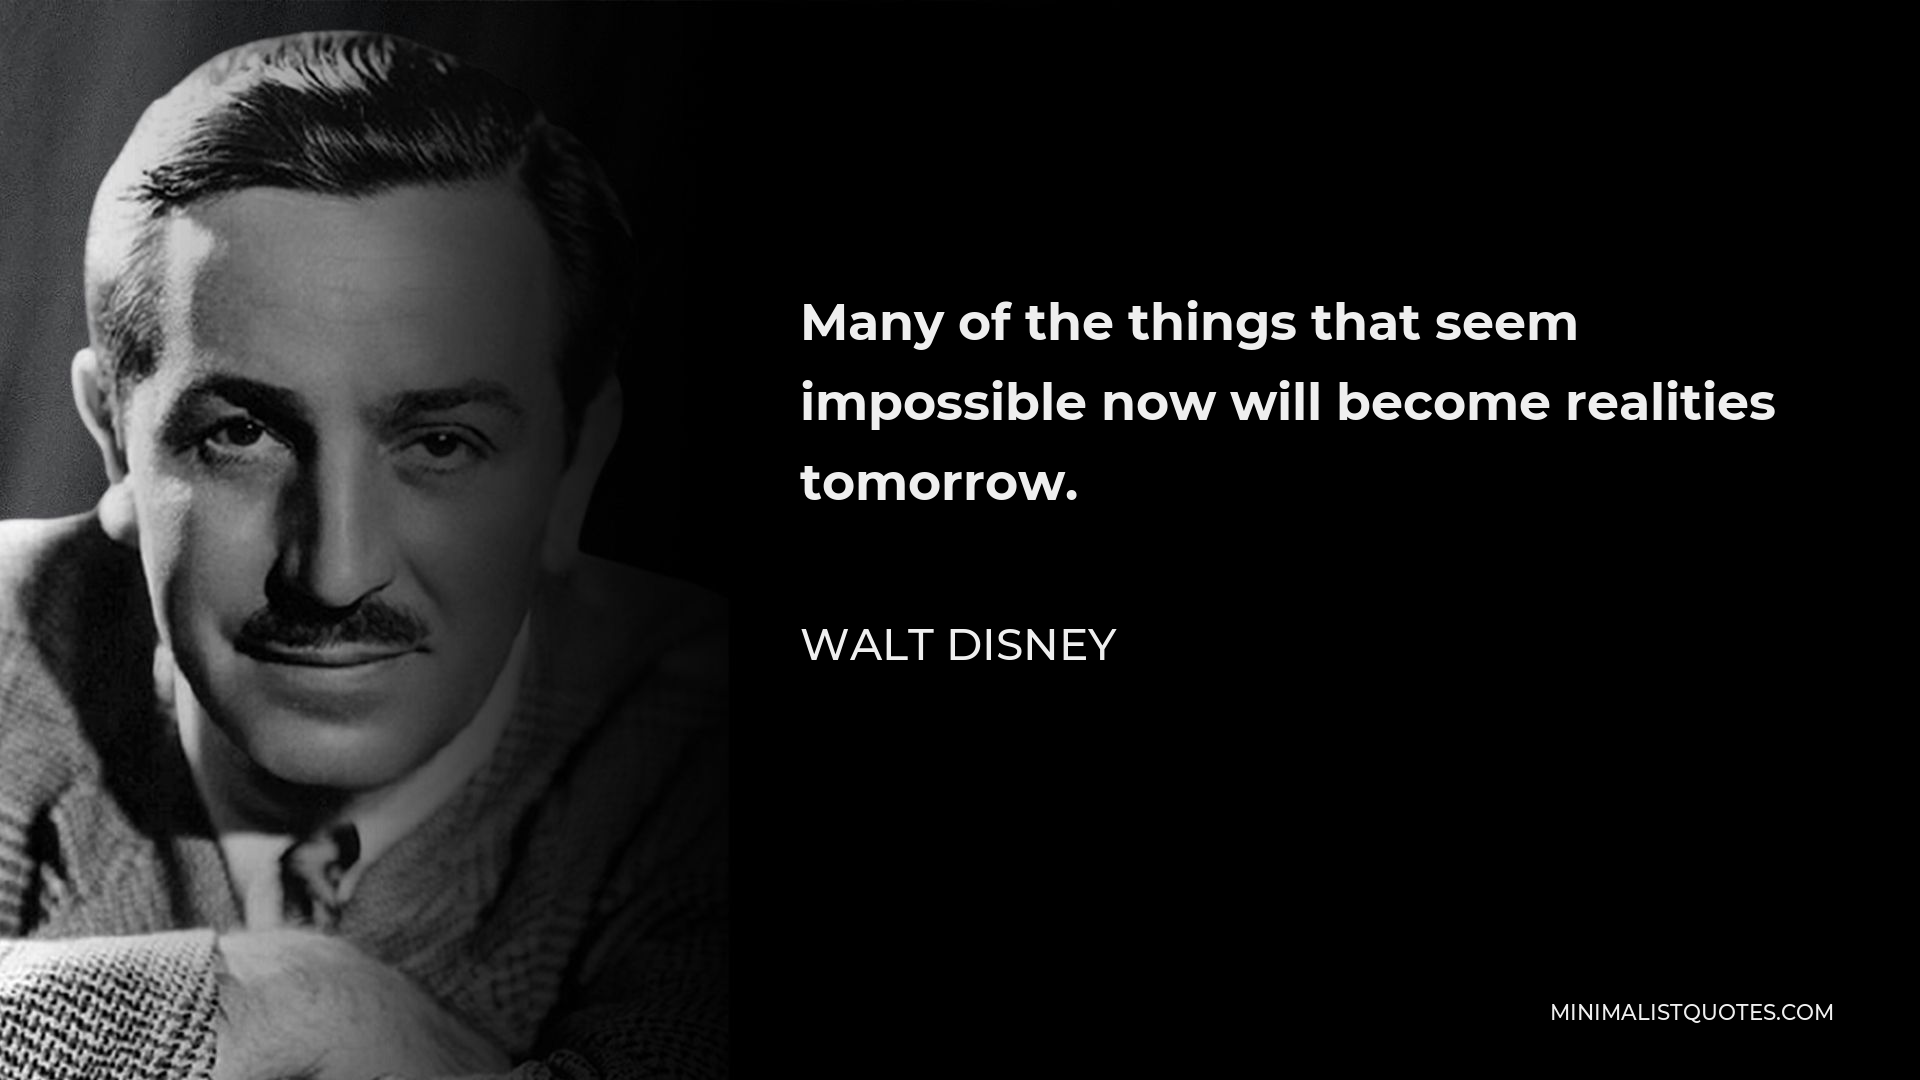 Walt Disney Quote - Many of the things that seem impossible now will become realities tomorrow.